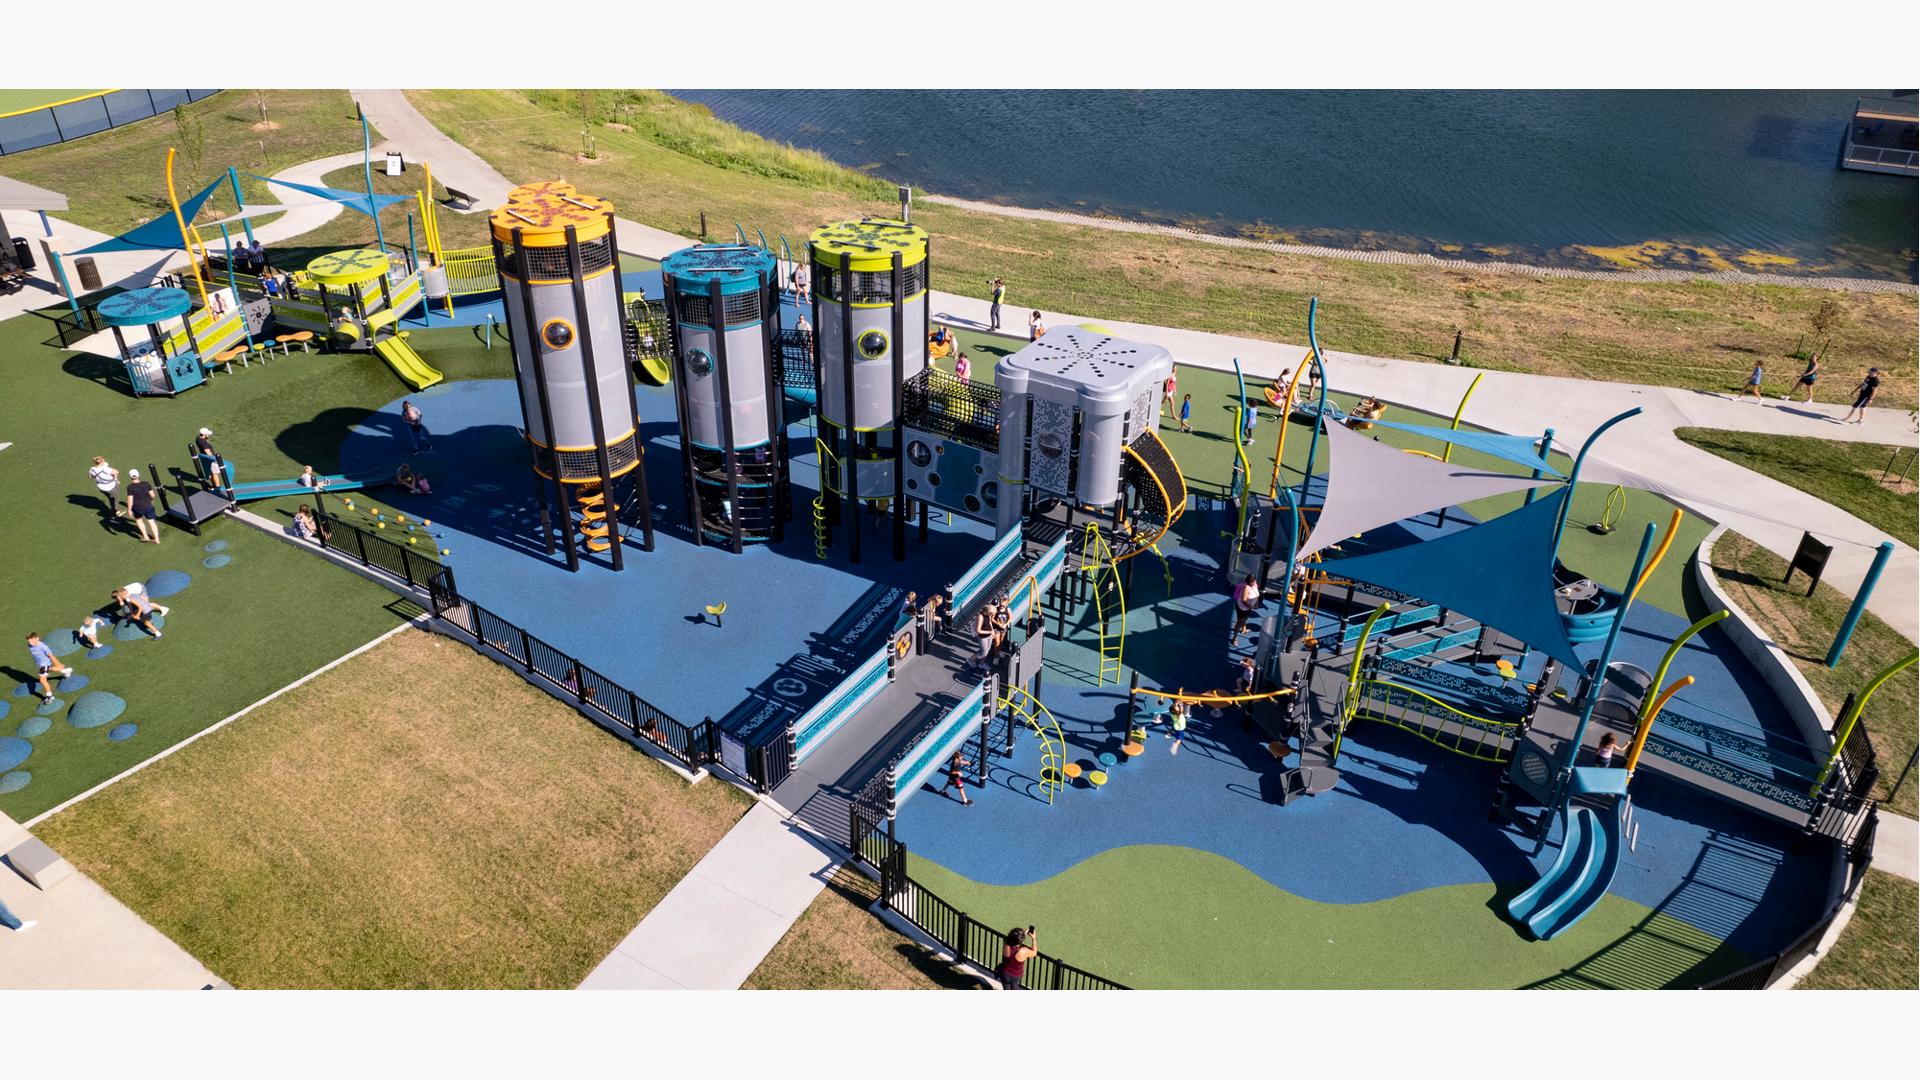 Elevated view of a large playground area set next to a pond. With a futuristic design four playground towers interconnected sit next to an additional play structure made of accessible ramps and three triangular shade sails overhead.